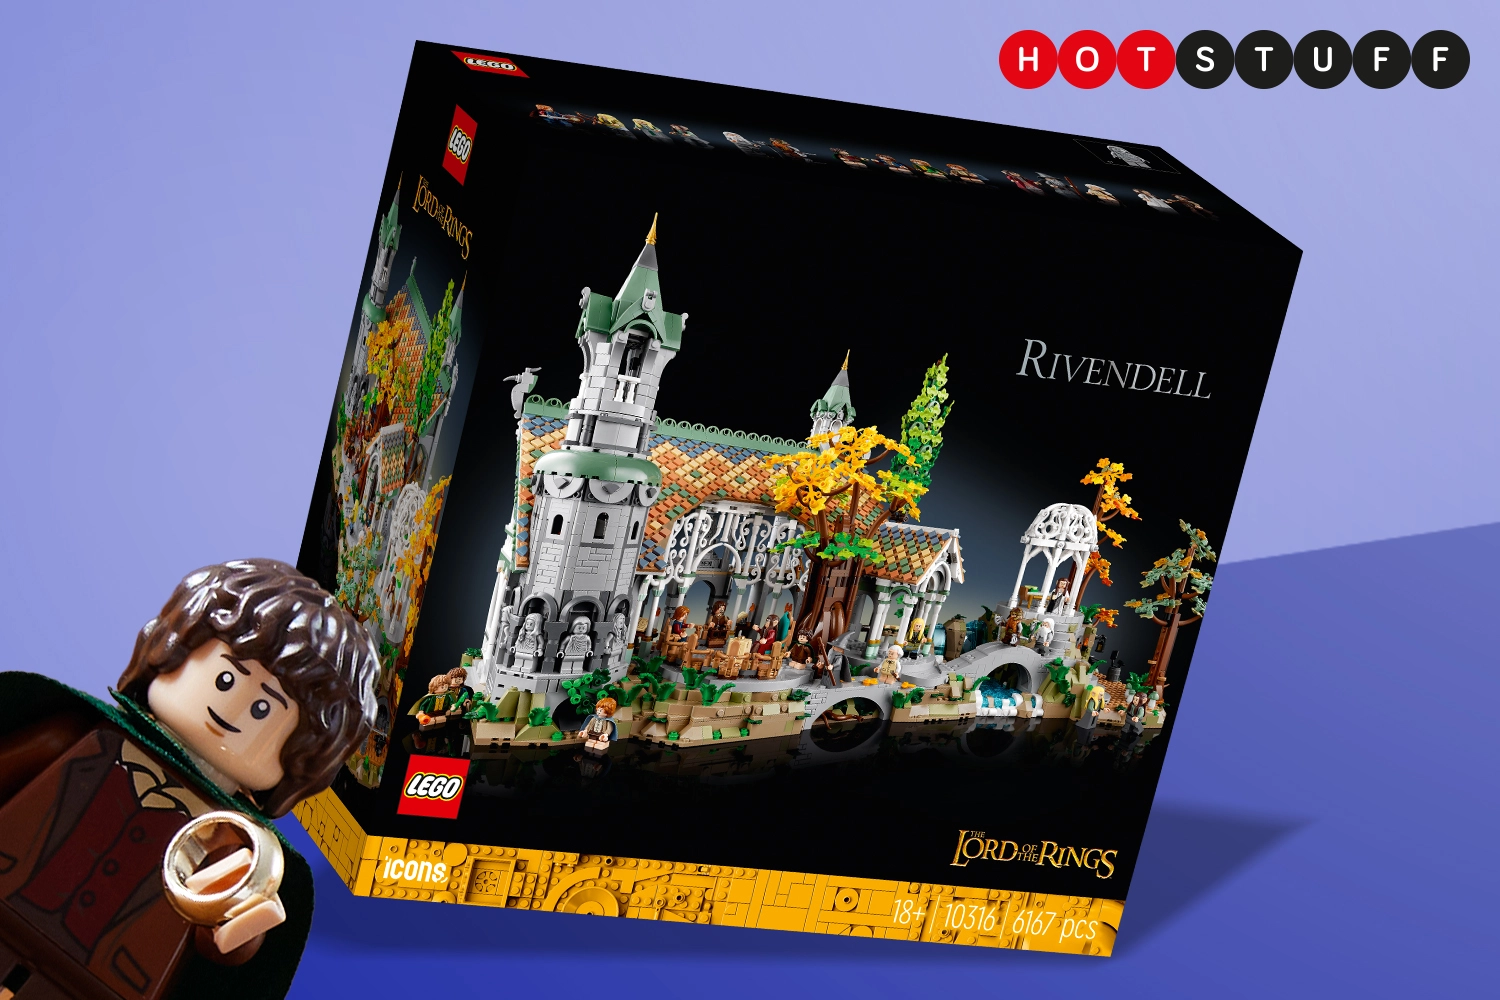 The 6,167-Piece Rivendell Is the One Lego Lord of the Rings Set to Rule Them All